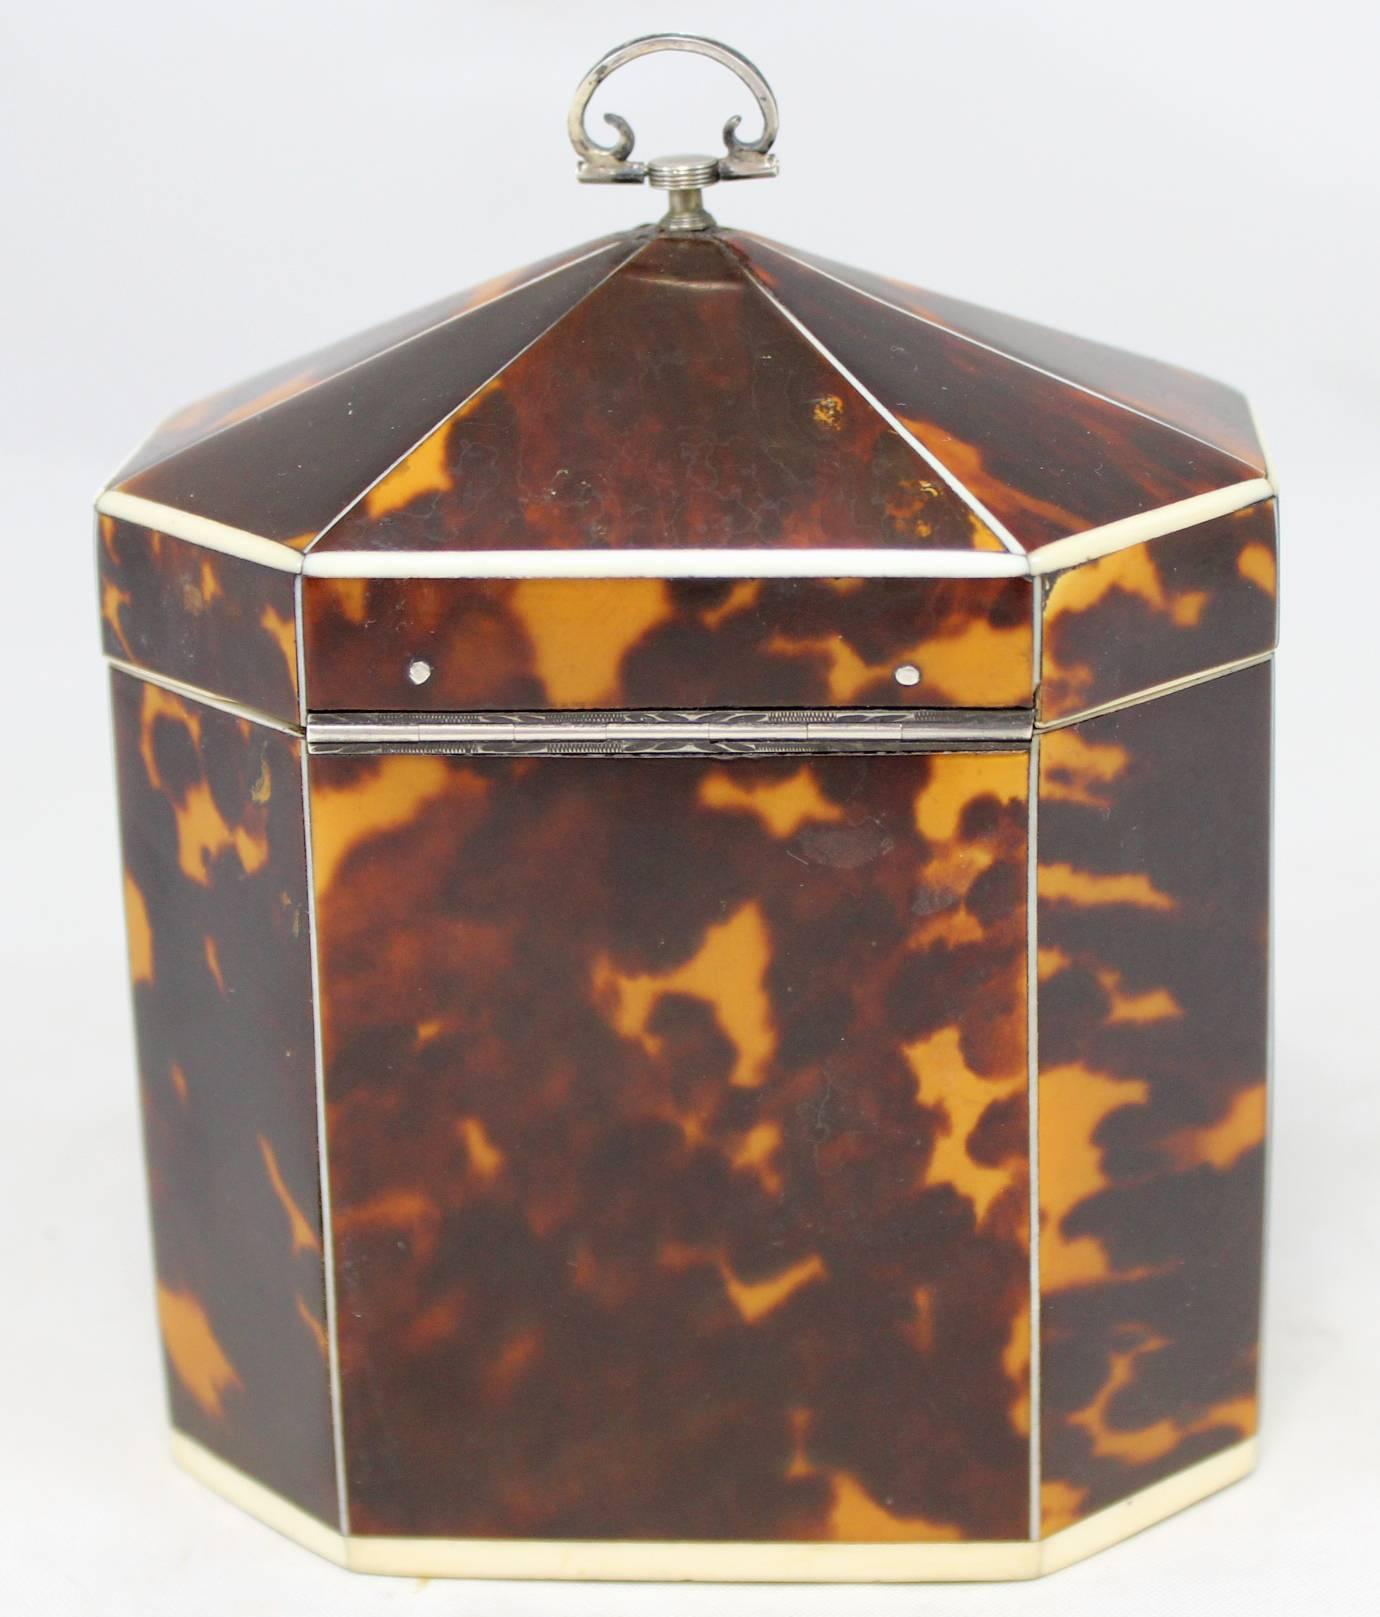 Carved Exceptional Late 18th Century English Tea Caddy in Tortoiseshell